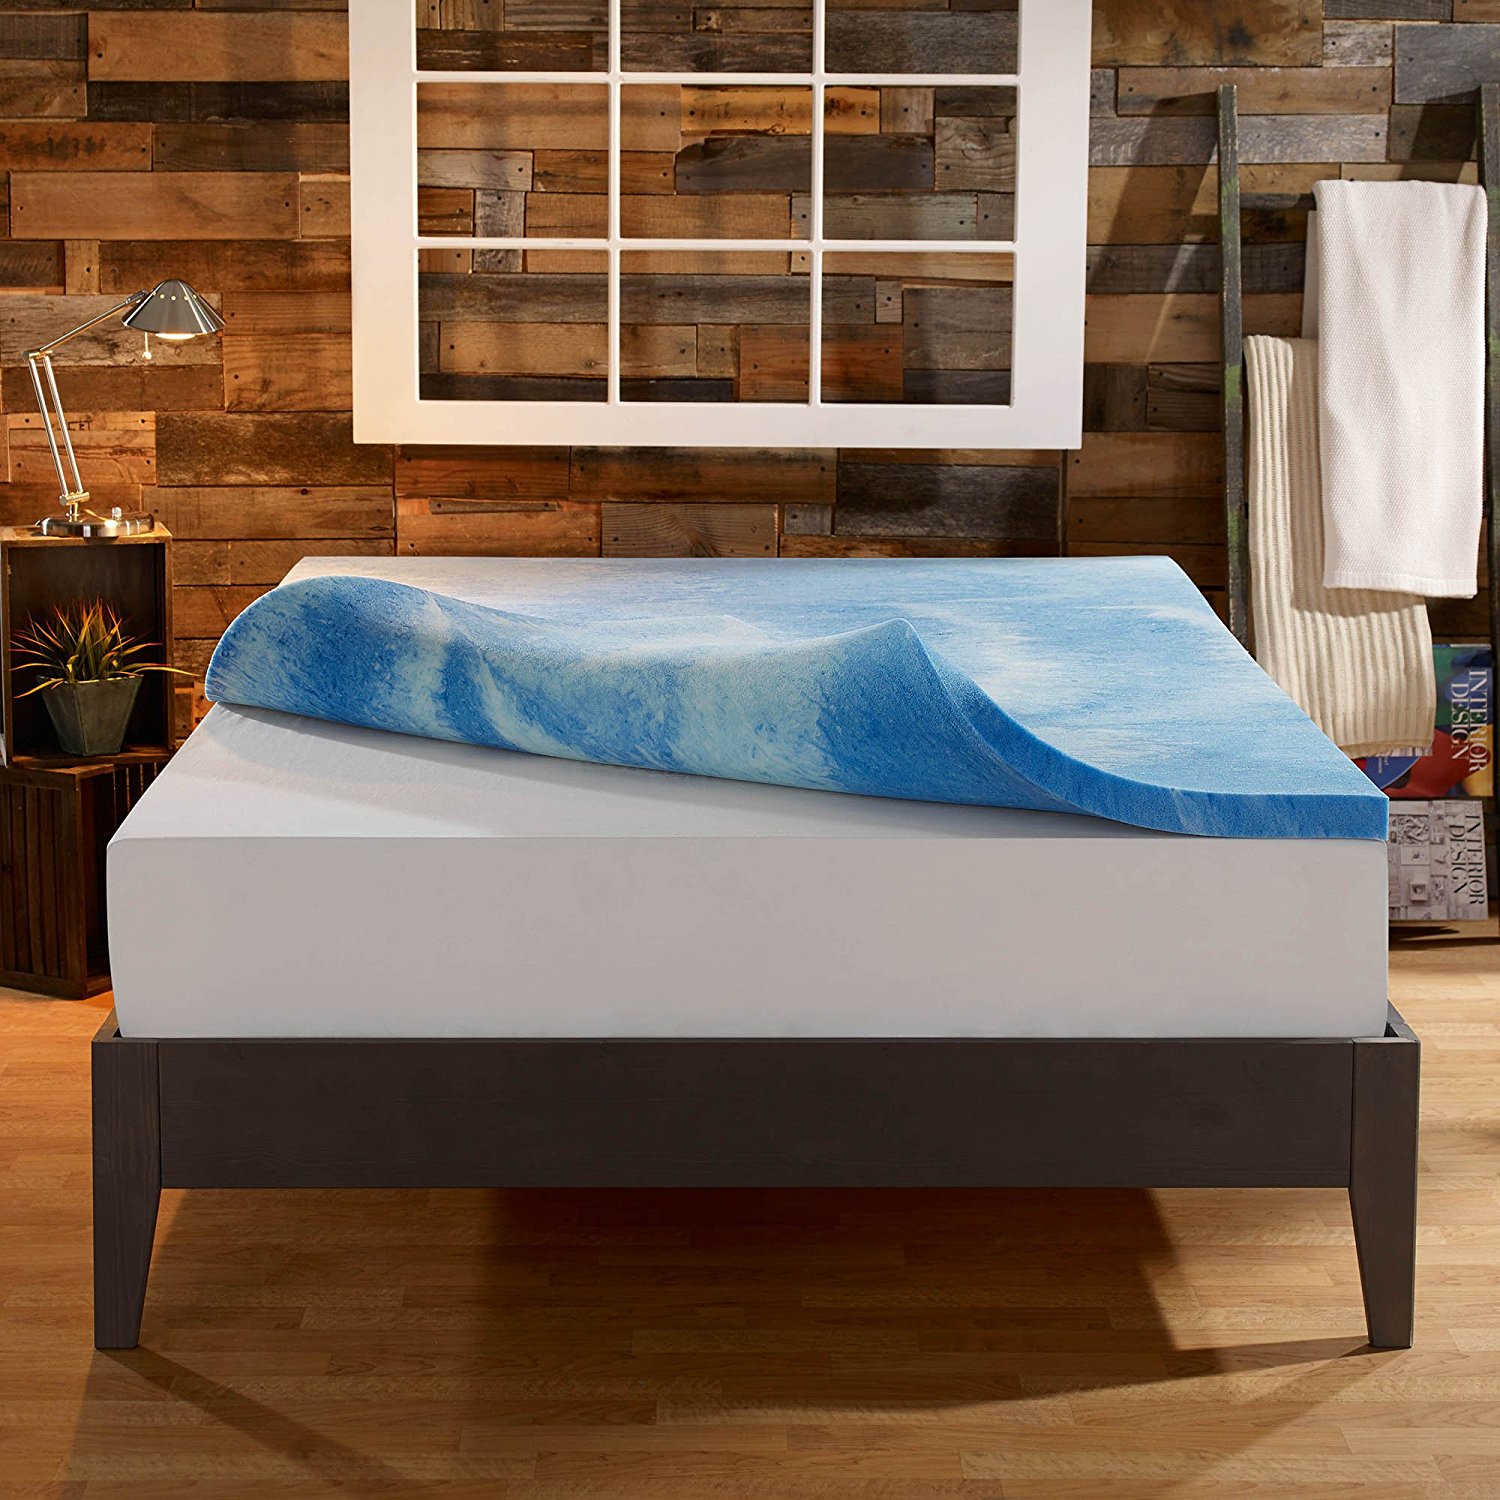 Sleep Innovations 4-Inch Dual Layer Mattress Topper - Gel Memory Foam and Plush Fiber. 10-year limited warranty. Queen Size